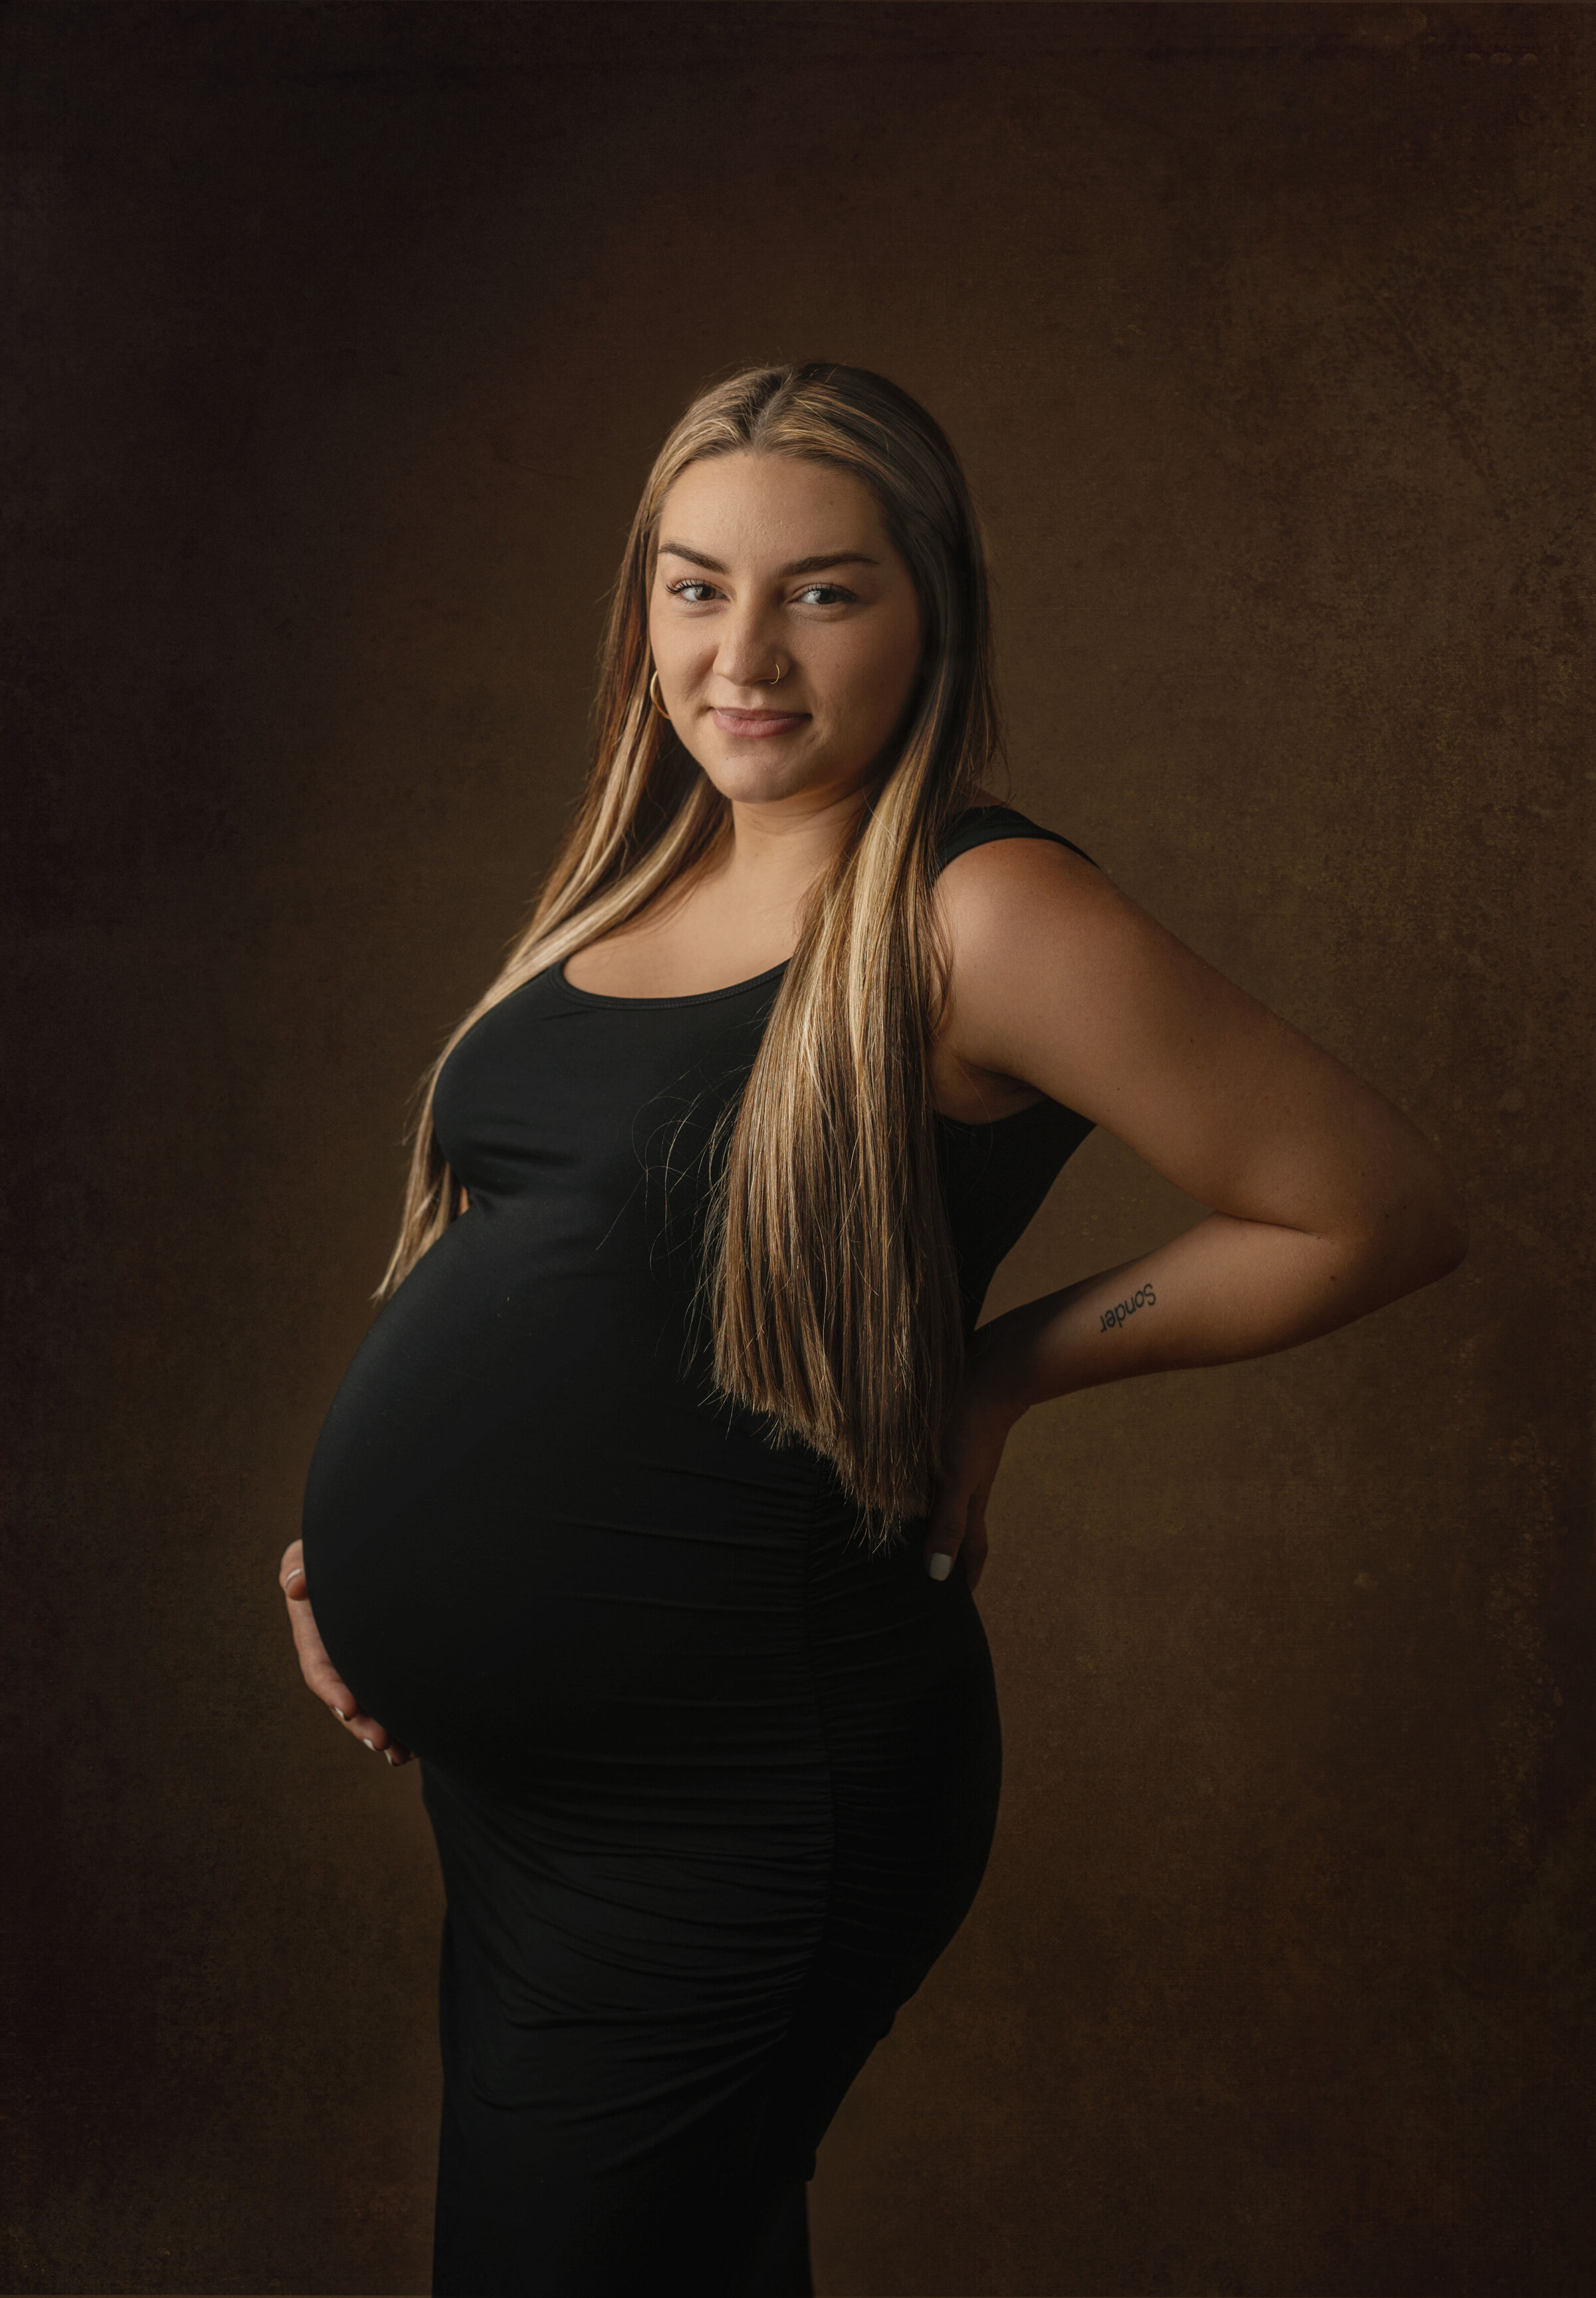 Pregnant women in bucyrus ohio studio, with  one hand on belly and one hand on her back